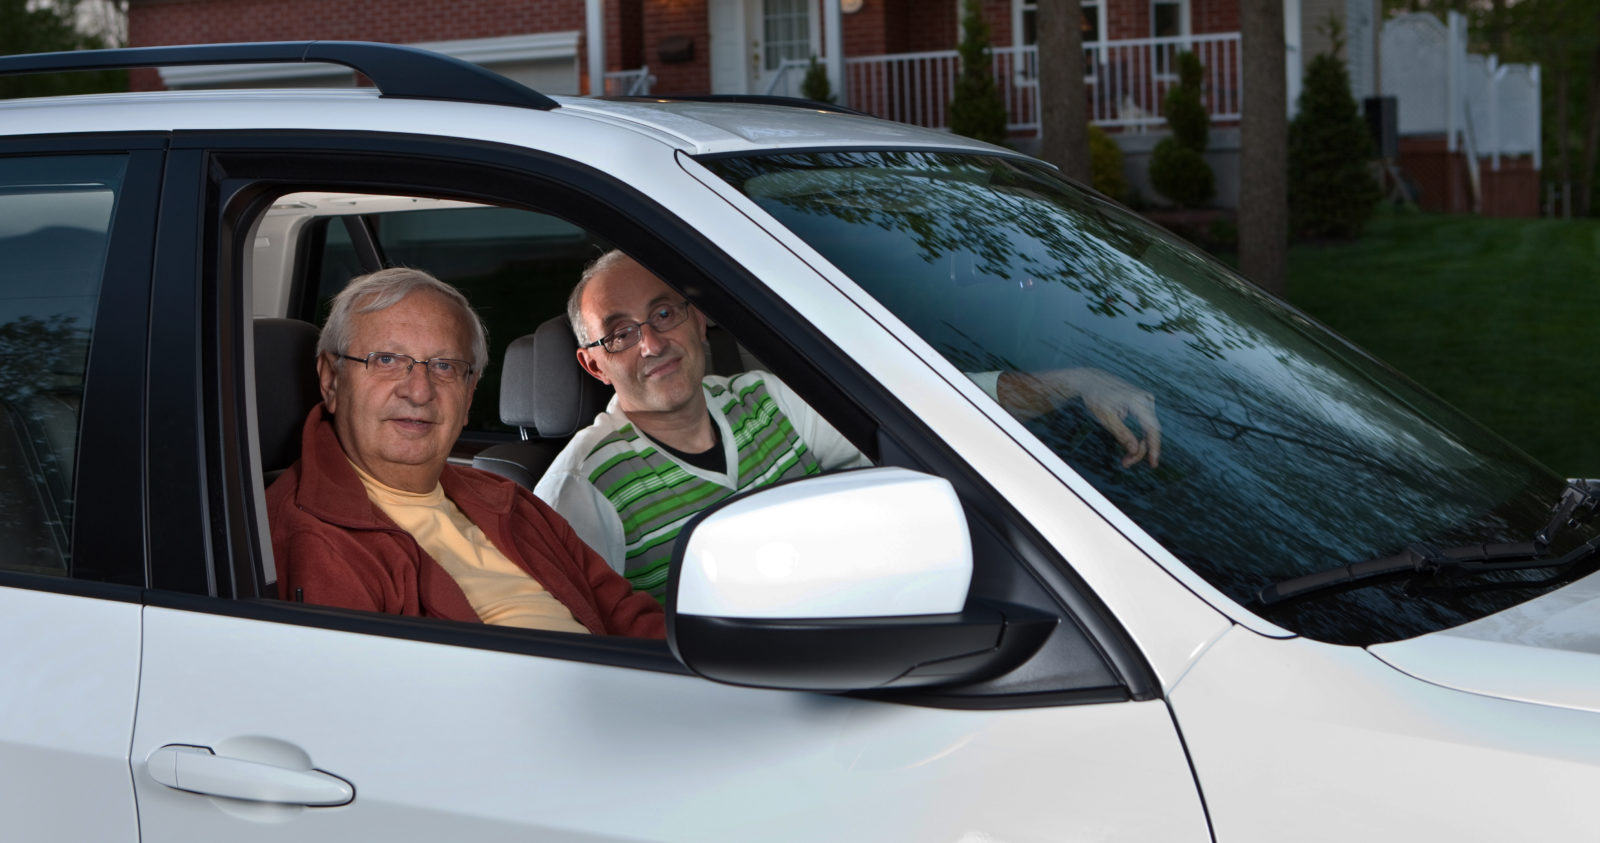 Two men parked in a car in front of house.